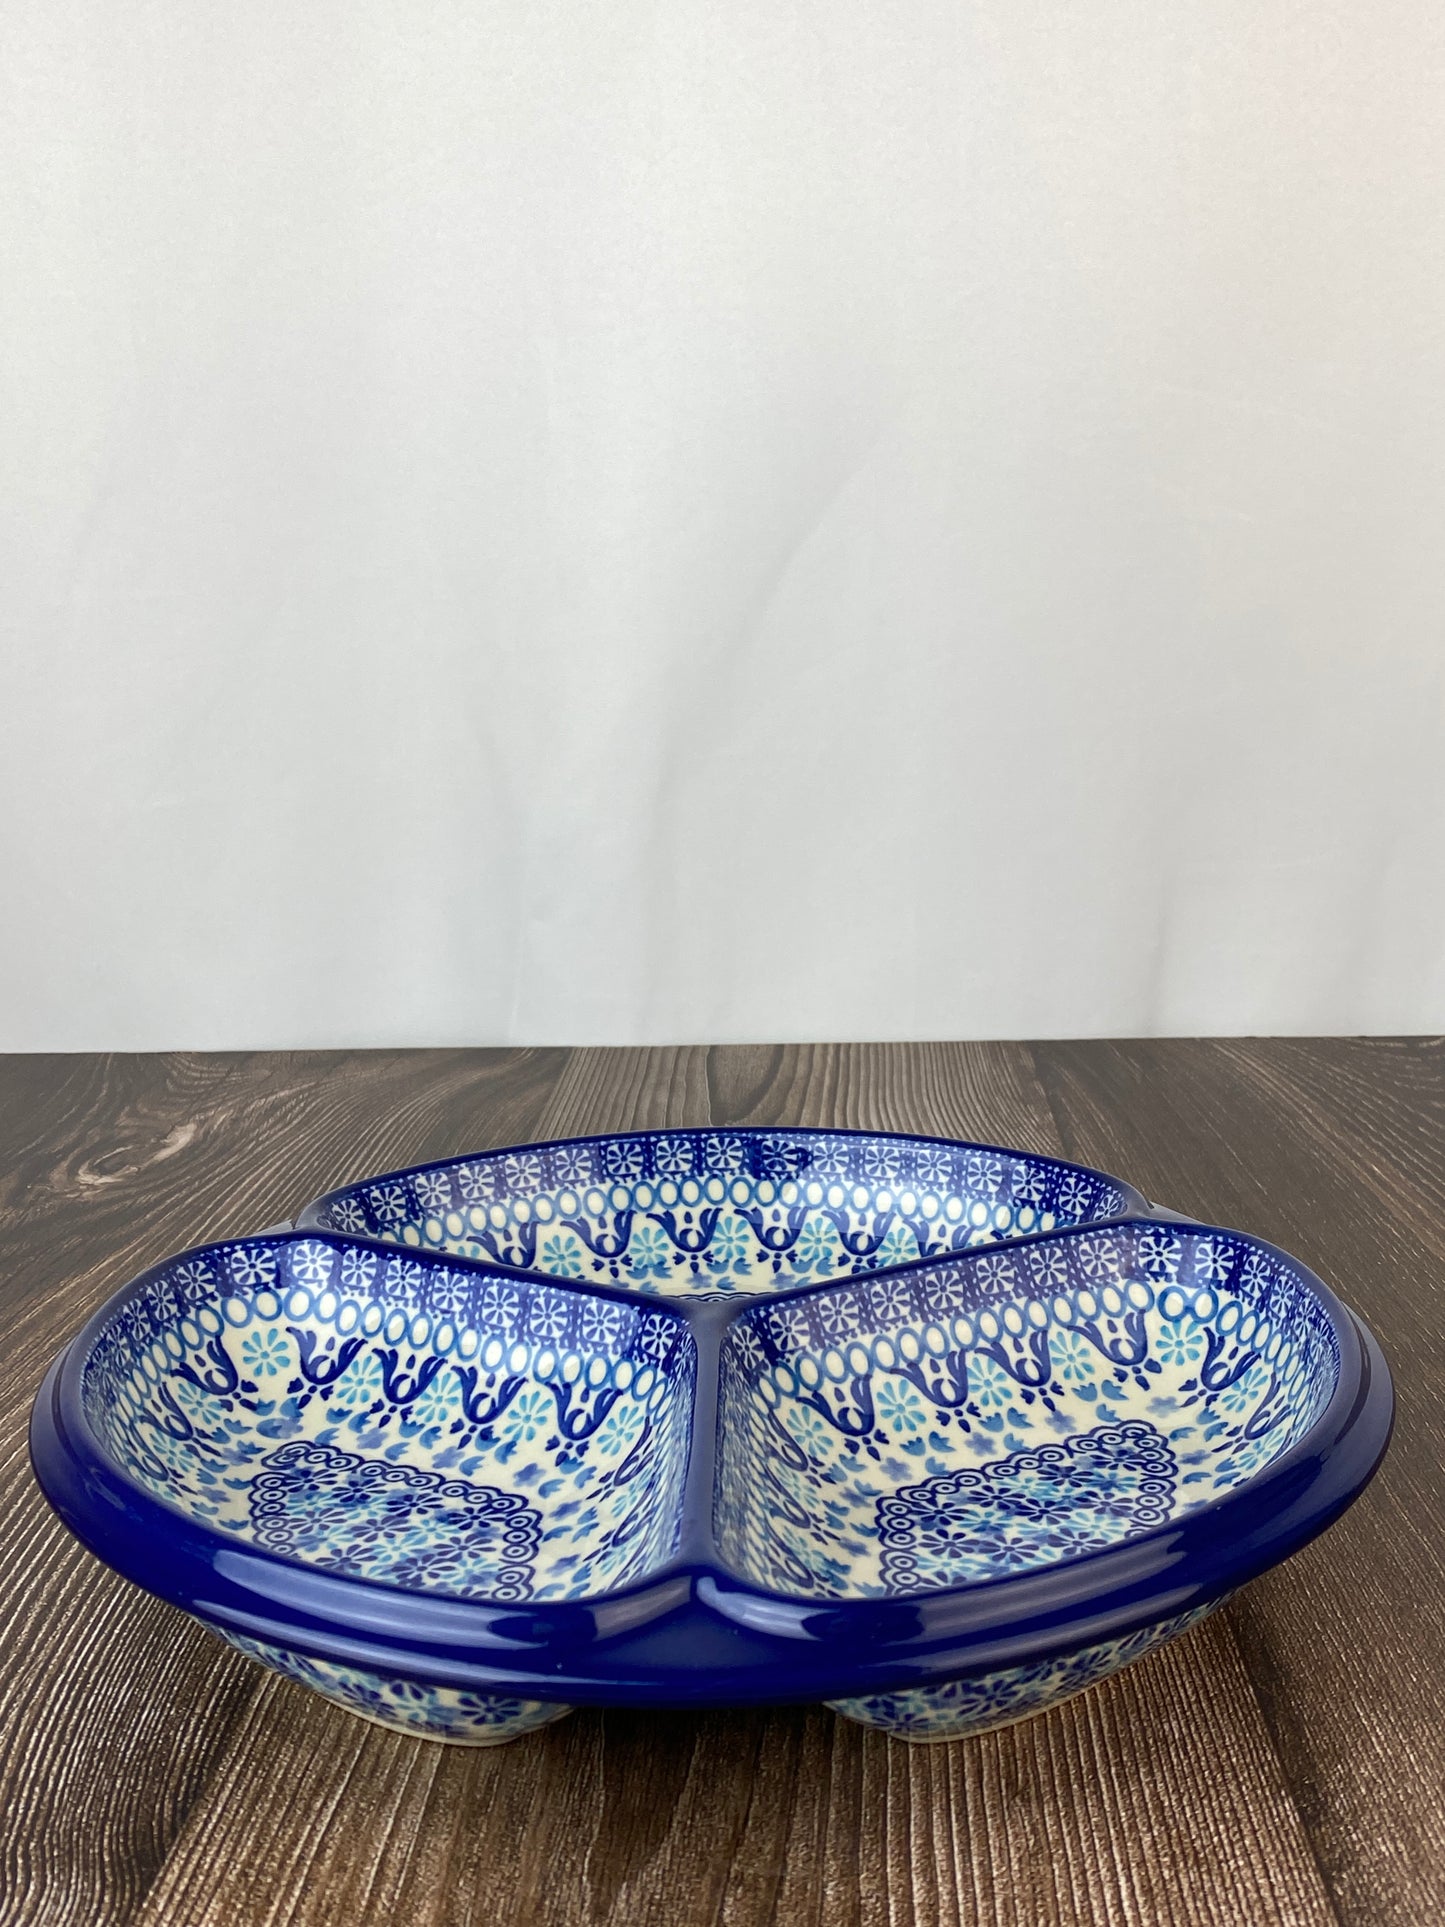 Divided Round Dish - Shape 484 - Pattern 2185